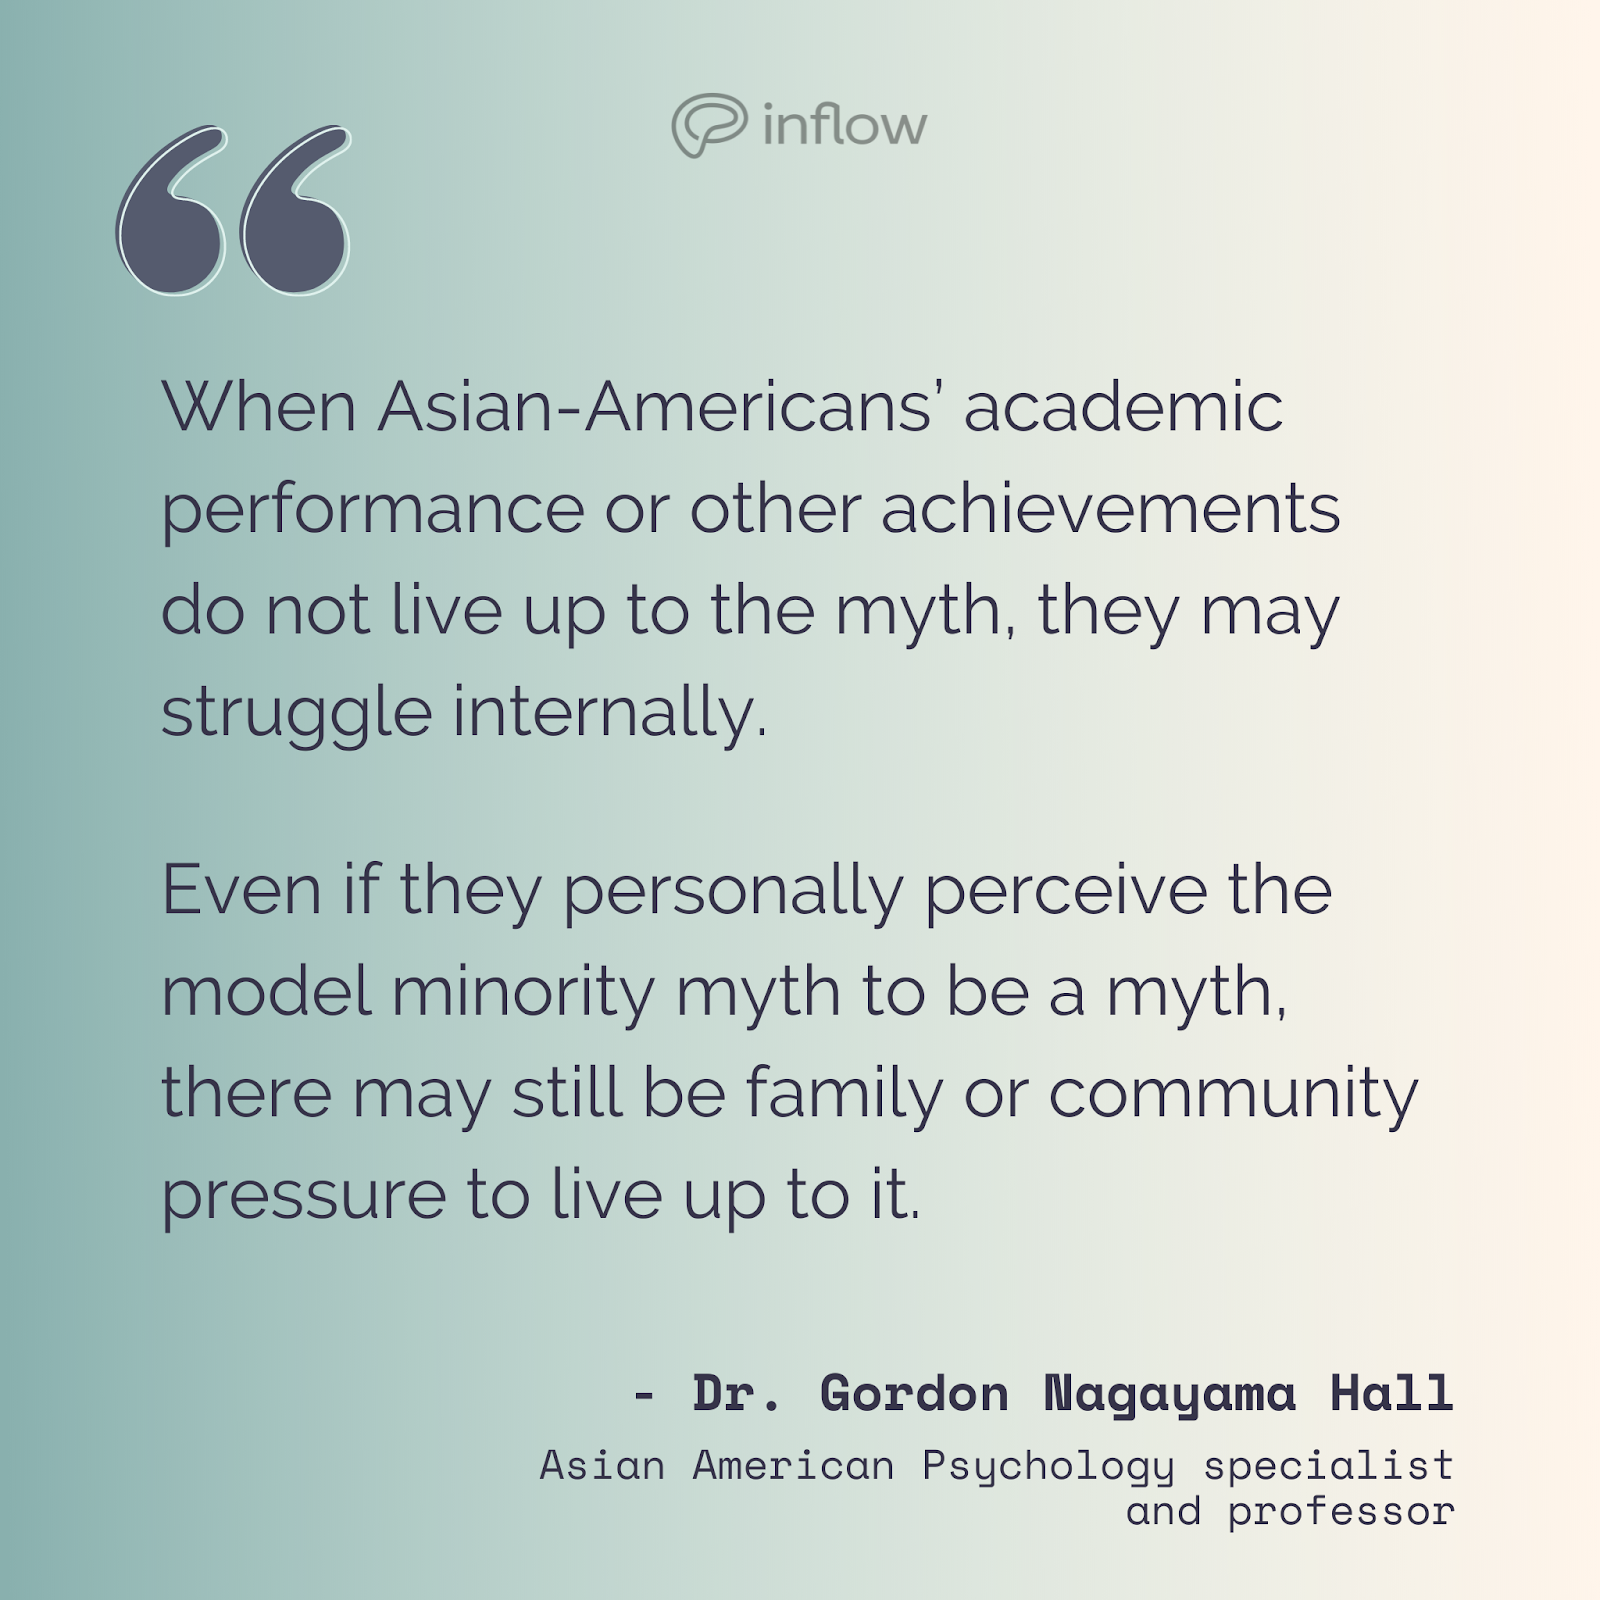 quote graphic. “When Asian-Americans’ academic performance or other achievements do not live up to the myth, they may struggle internally. Even if they personally perceive the model minority myth to be a myth, there may still be family or community pressure to live up to it.” Dr. Gordon Nagayama Hall, Asian American Psychology specialist and professor